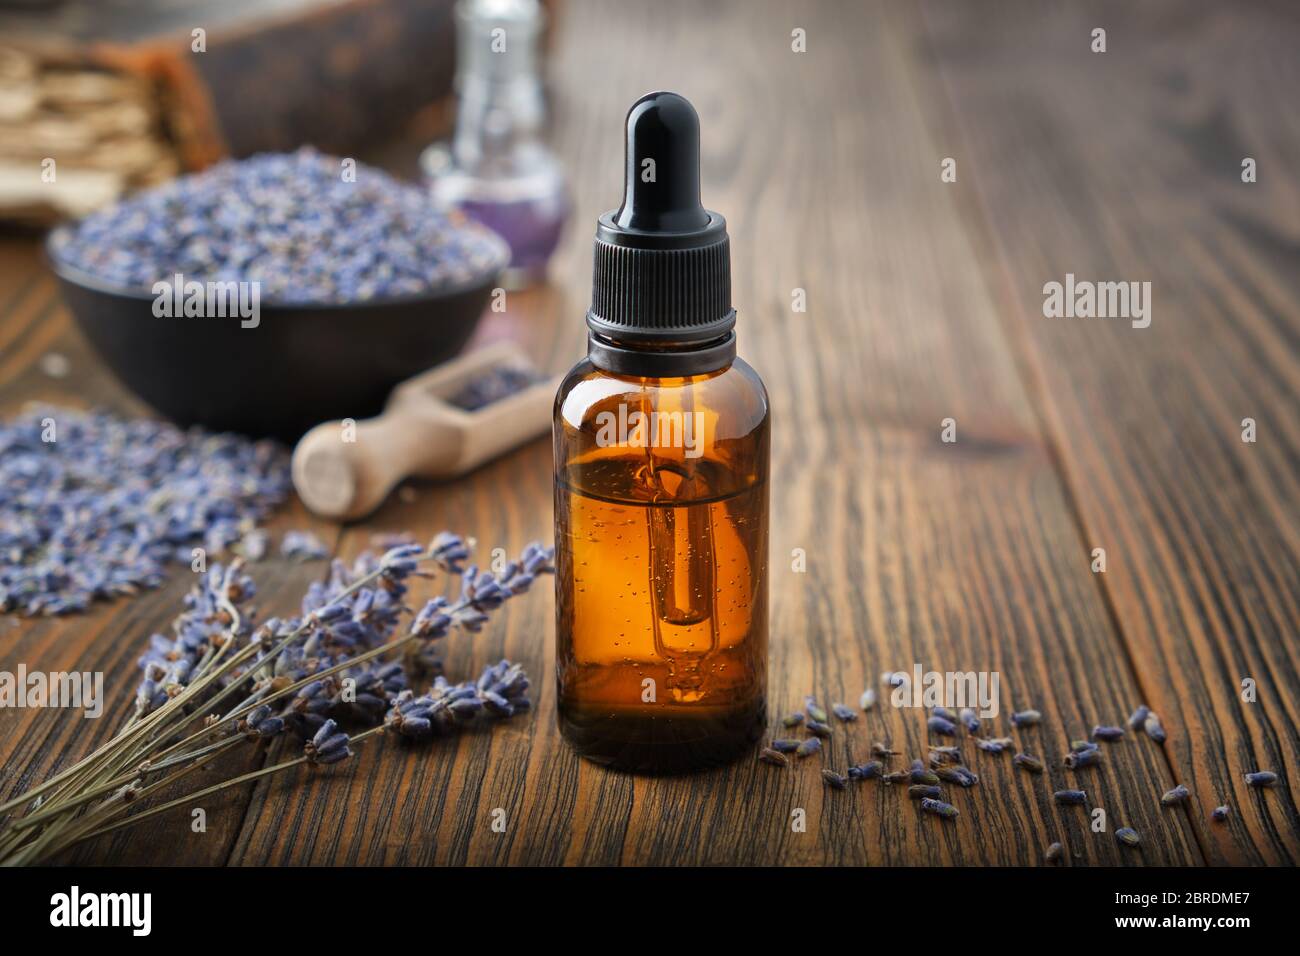 Dropper bottle of essential lavender oil. Bowl of dry lavender flowers on background. Stock Photo